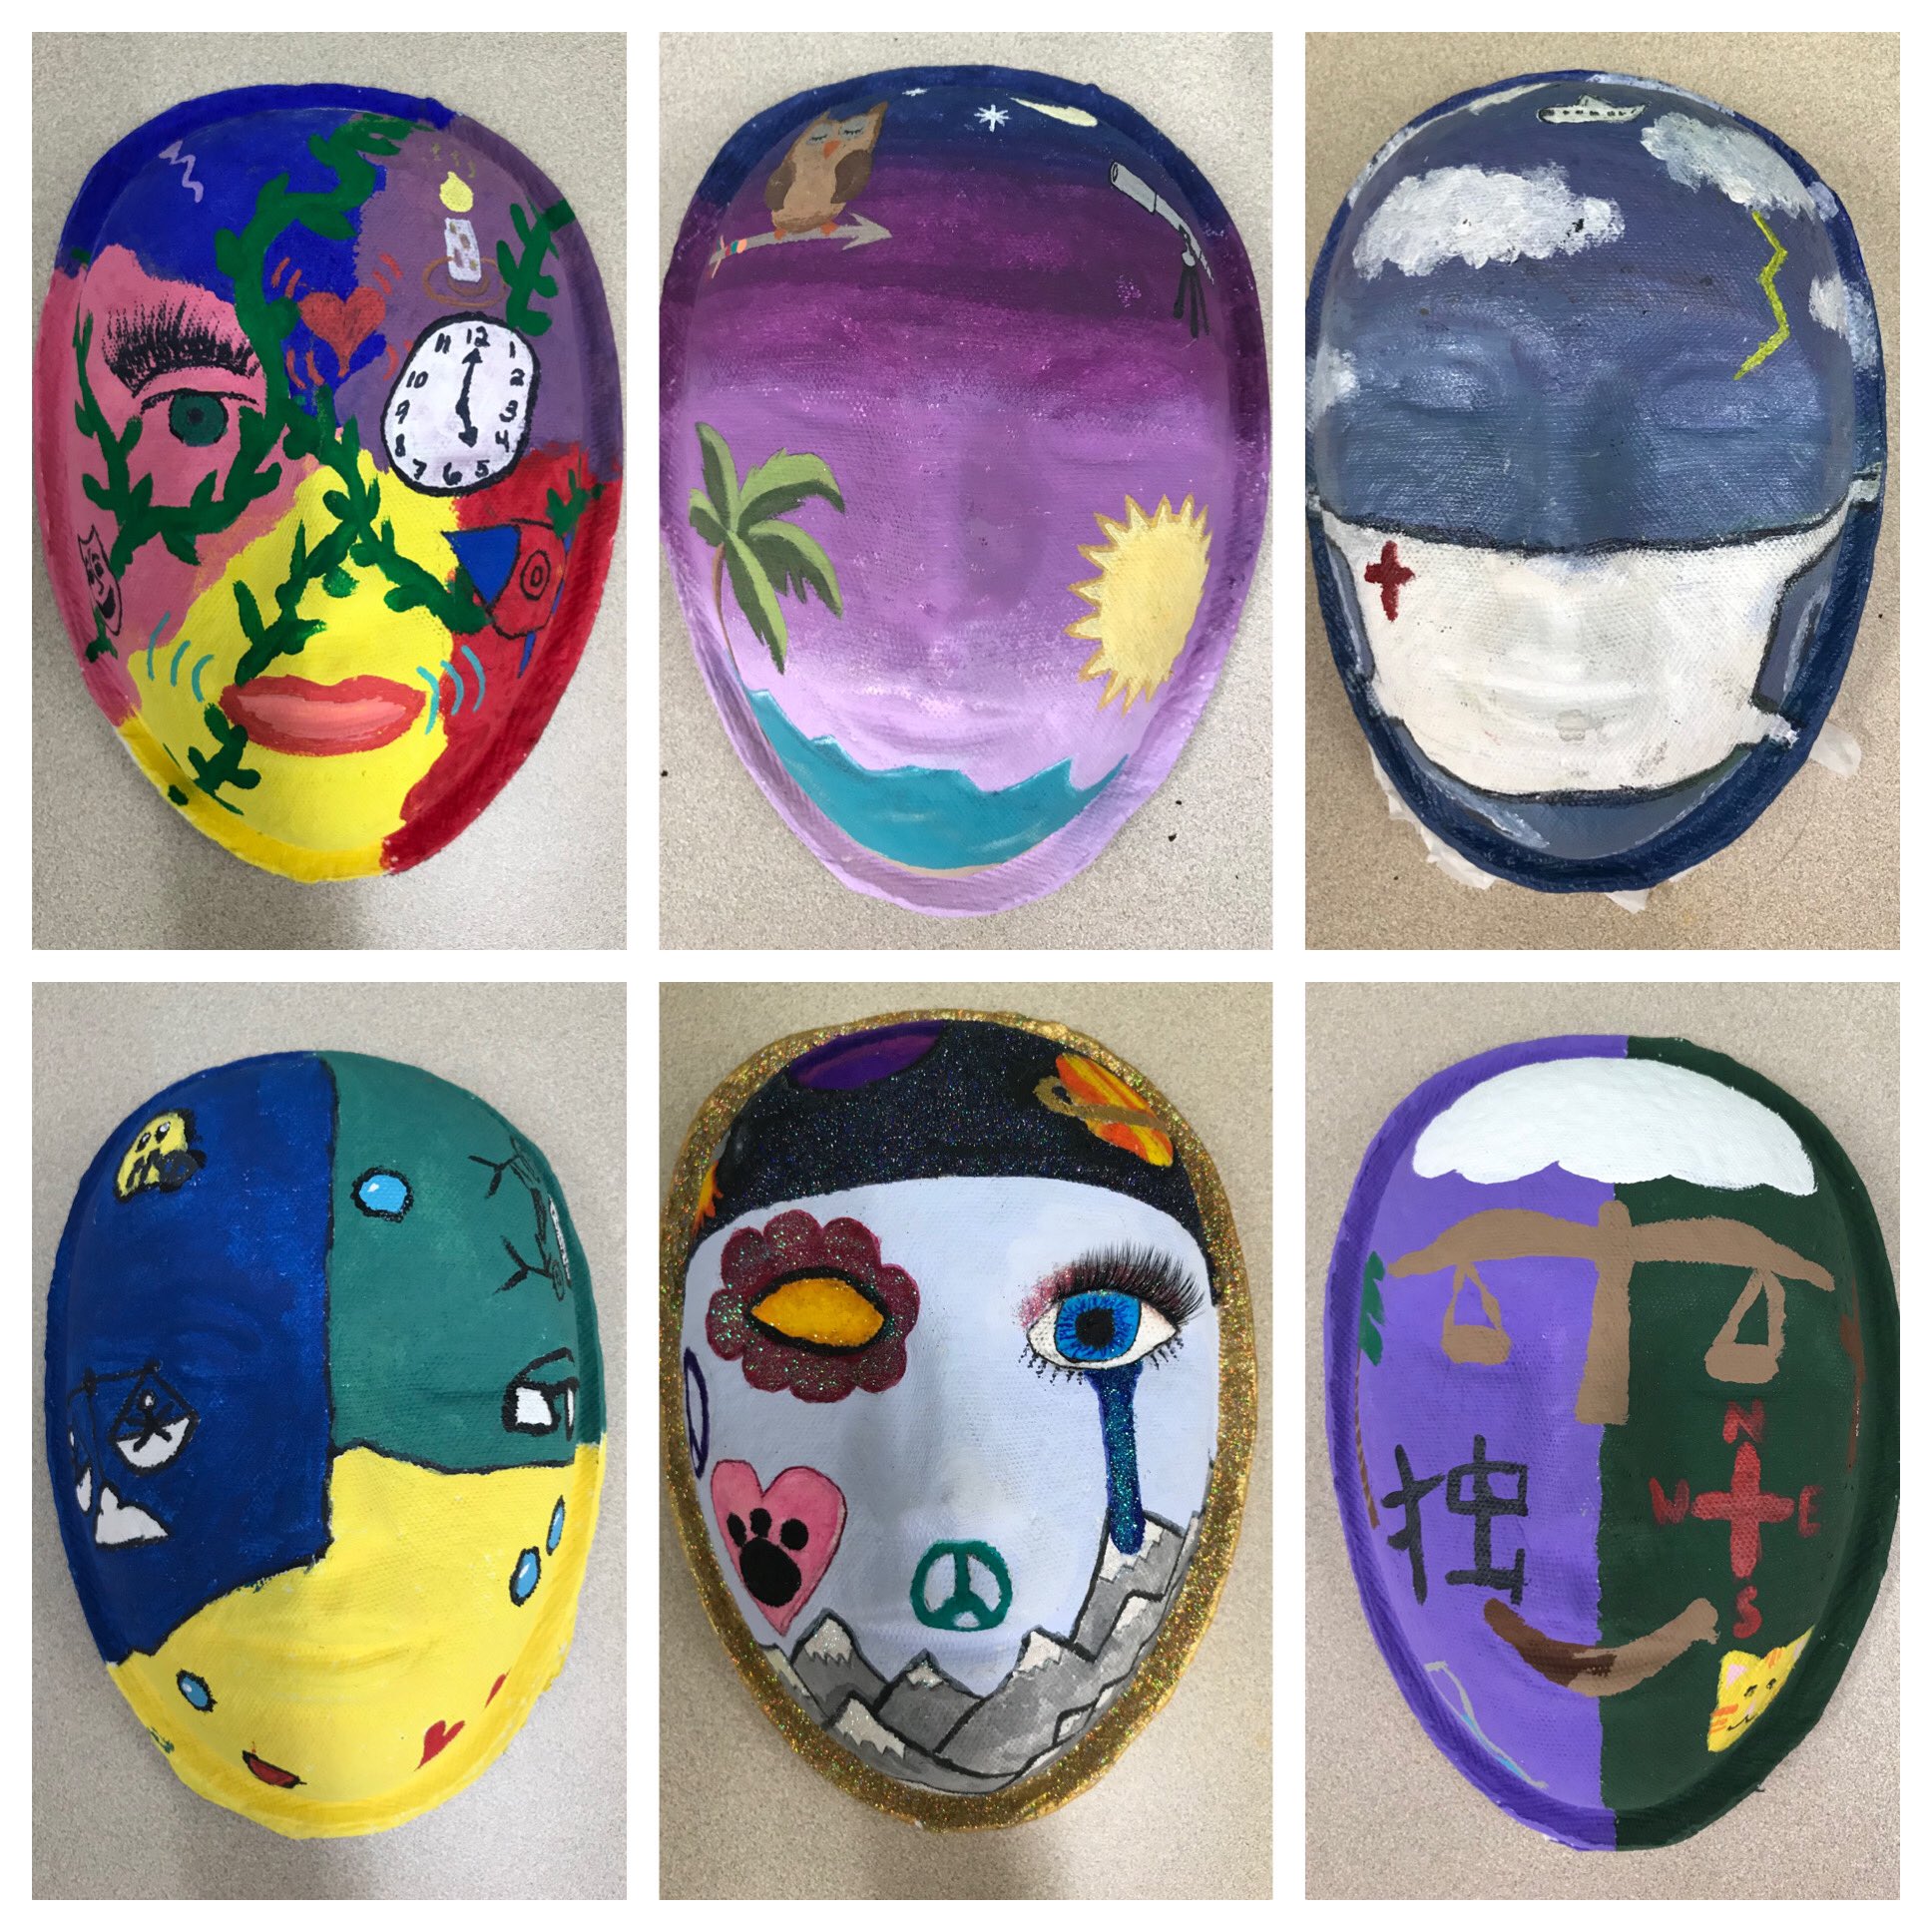 ly forretning desinfektionsmiddel Mrs. Workman on Twitter: "This year's edition of the Personality Mask  Project. These kids do not disappoint! Amazing creativity, skill and self  analysis. #appsych #arteducation @VoelzJames https://t.co/5SbREHl5BY" / X